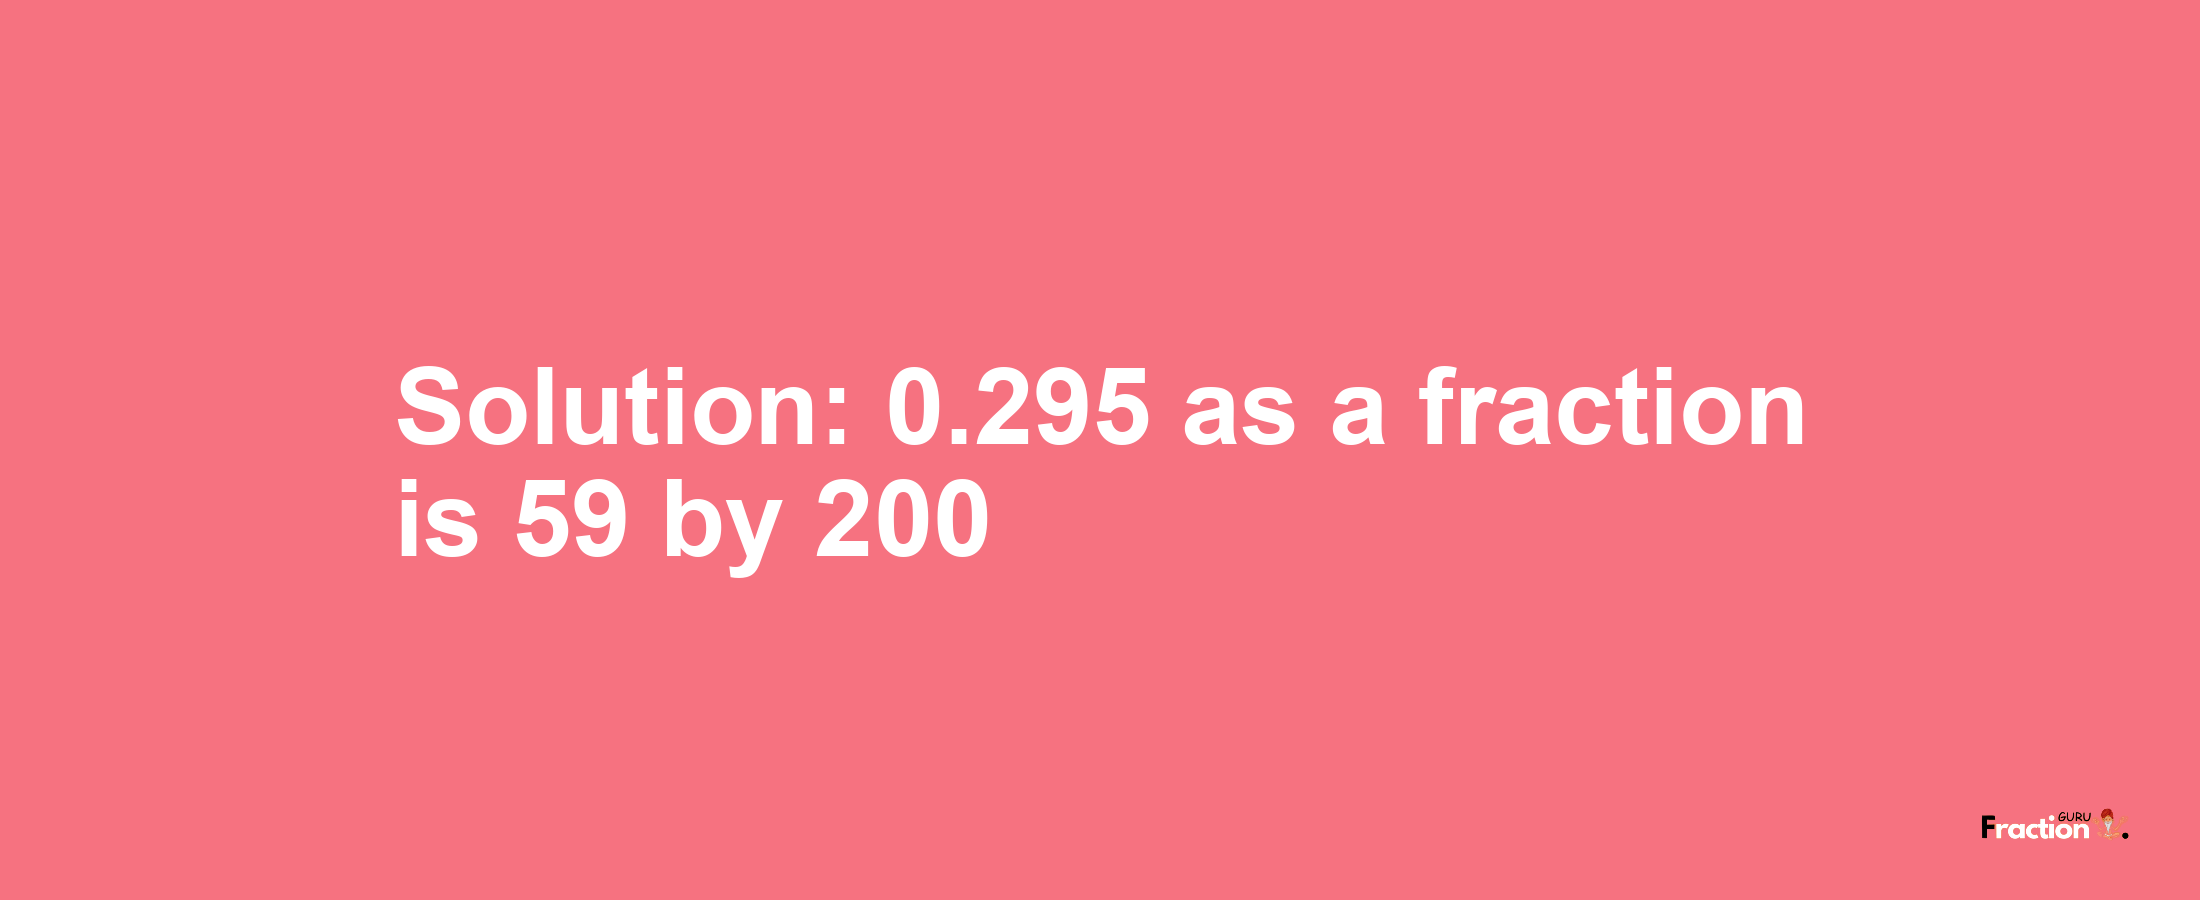 Solution:0.295 as a fraction is 59/200